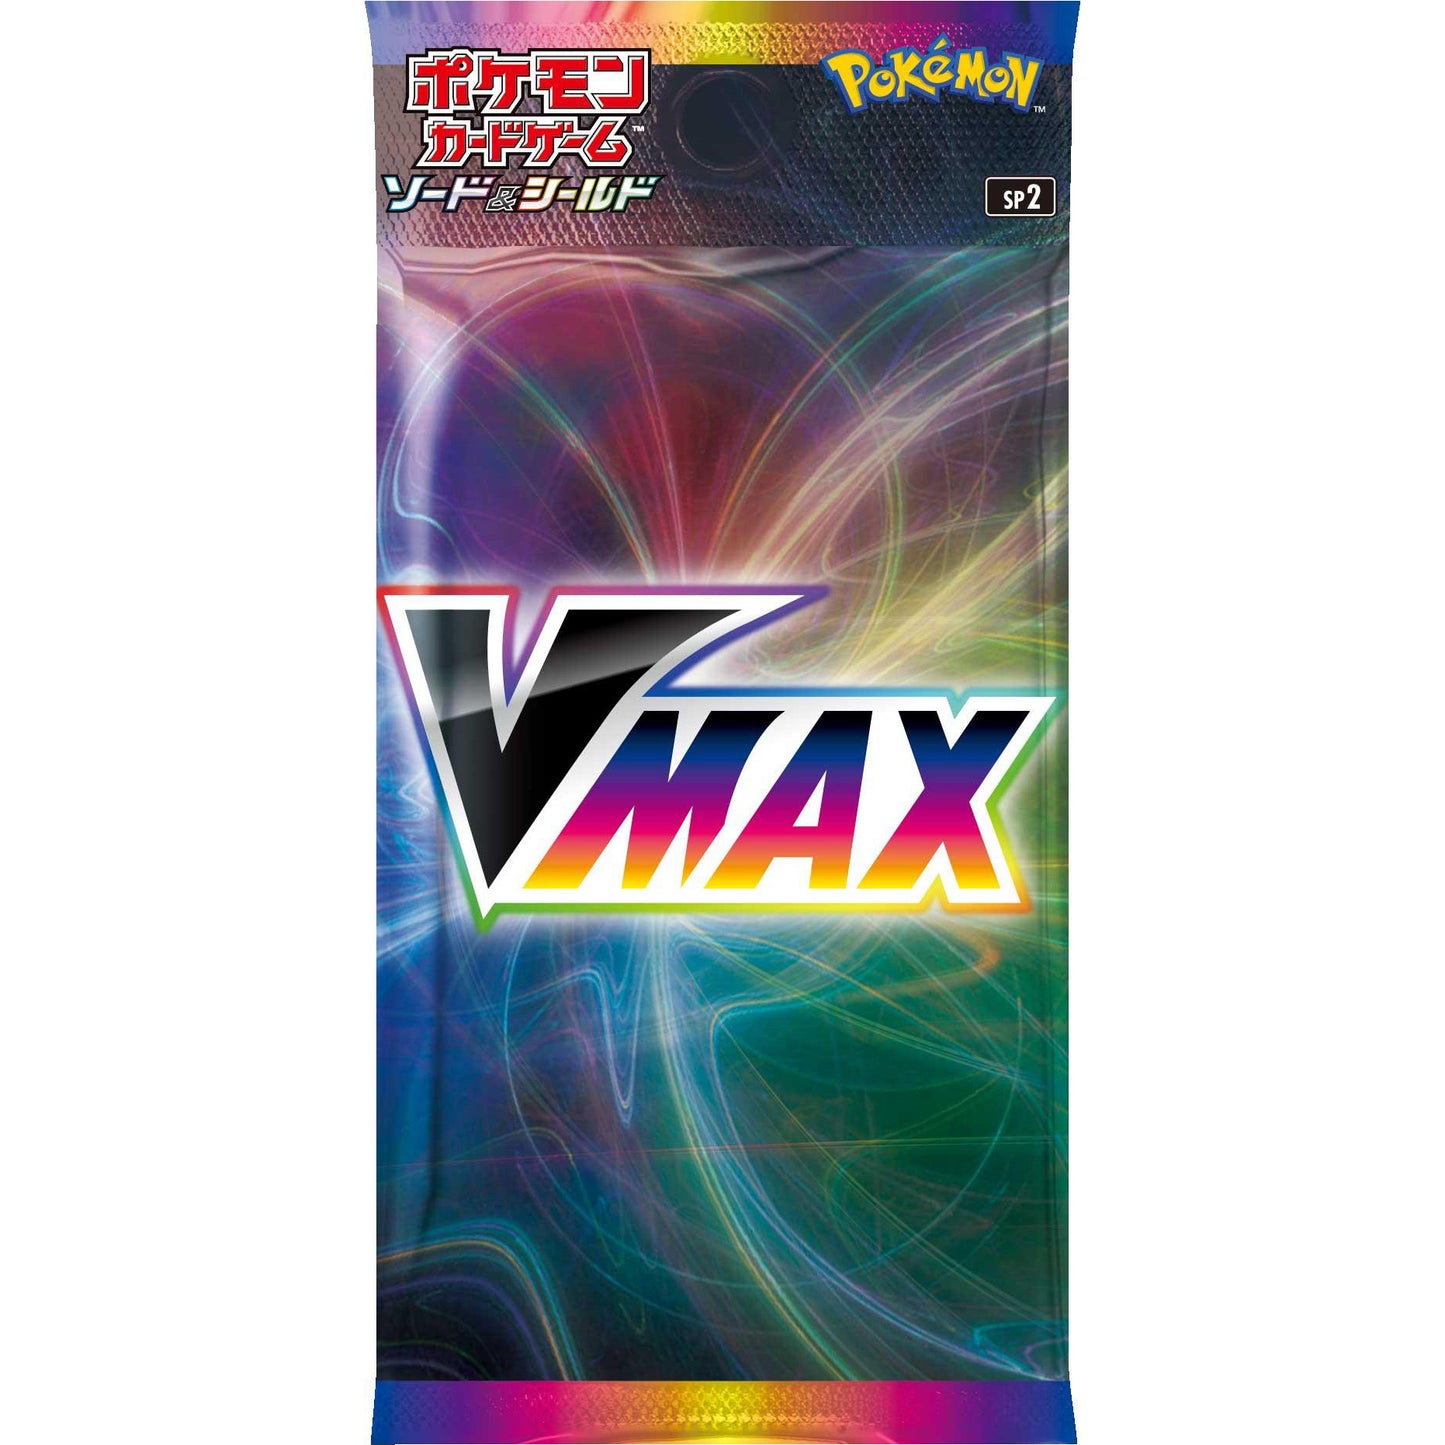 Japanese Pokemon VMAX Special Set Pack